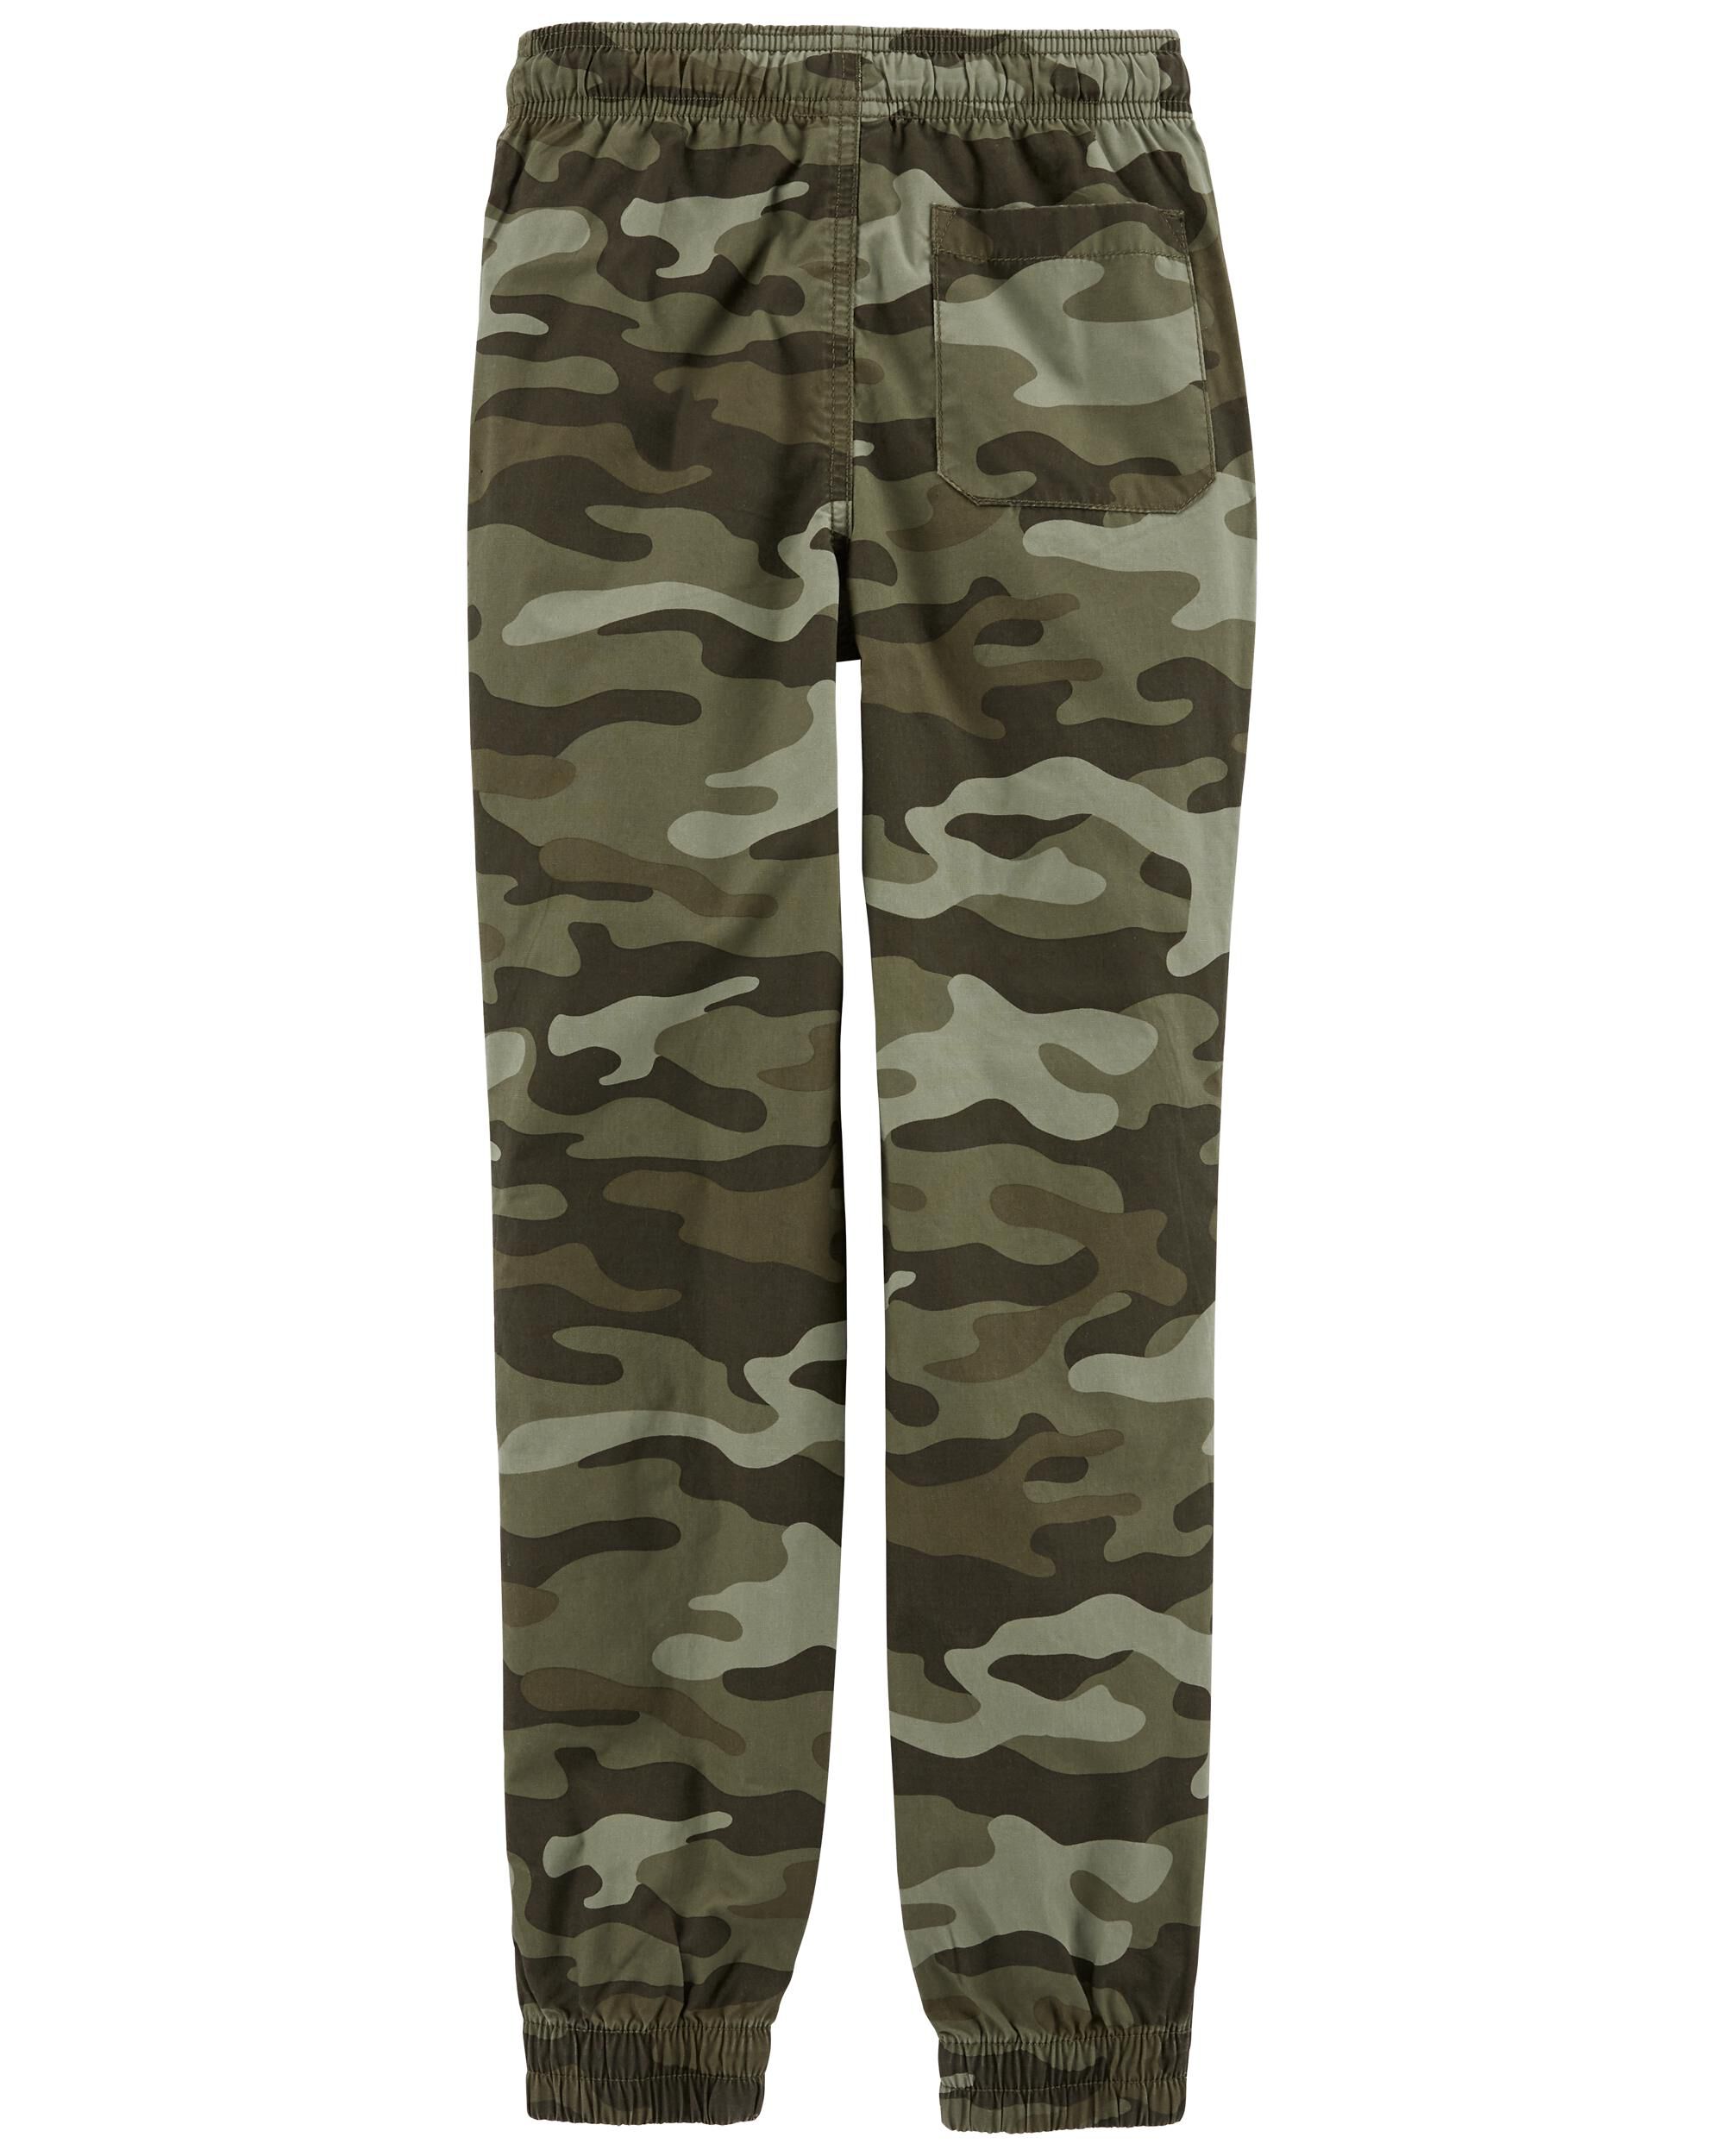 JURANMO Camouflage Print Cargo Pants for Men Casual Joggers Athletic Pants  Loose Fit Hiking Trousers Outdoor Wearing Pants with Pockets - Walmart.com